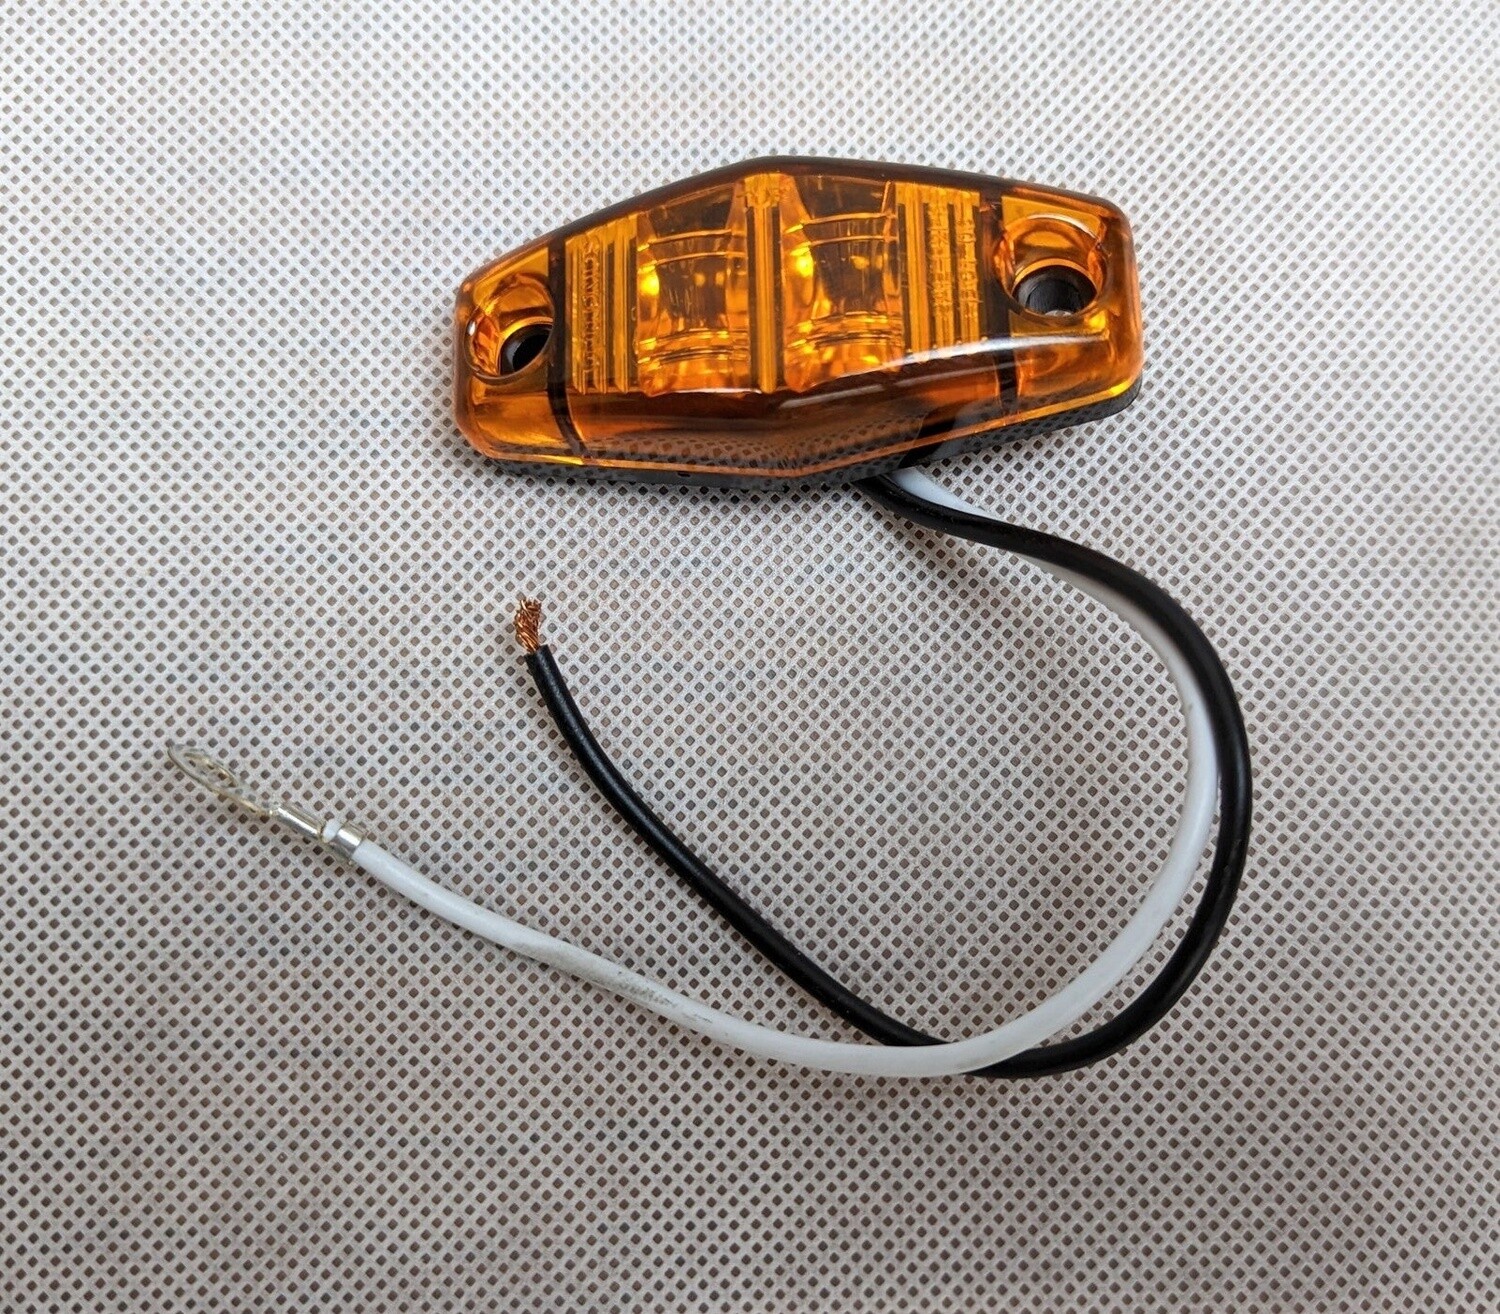 MCL13 Amber LED Marker Light. 2 diode, 2 wire